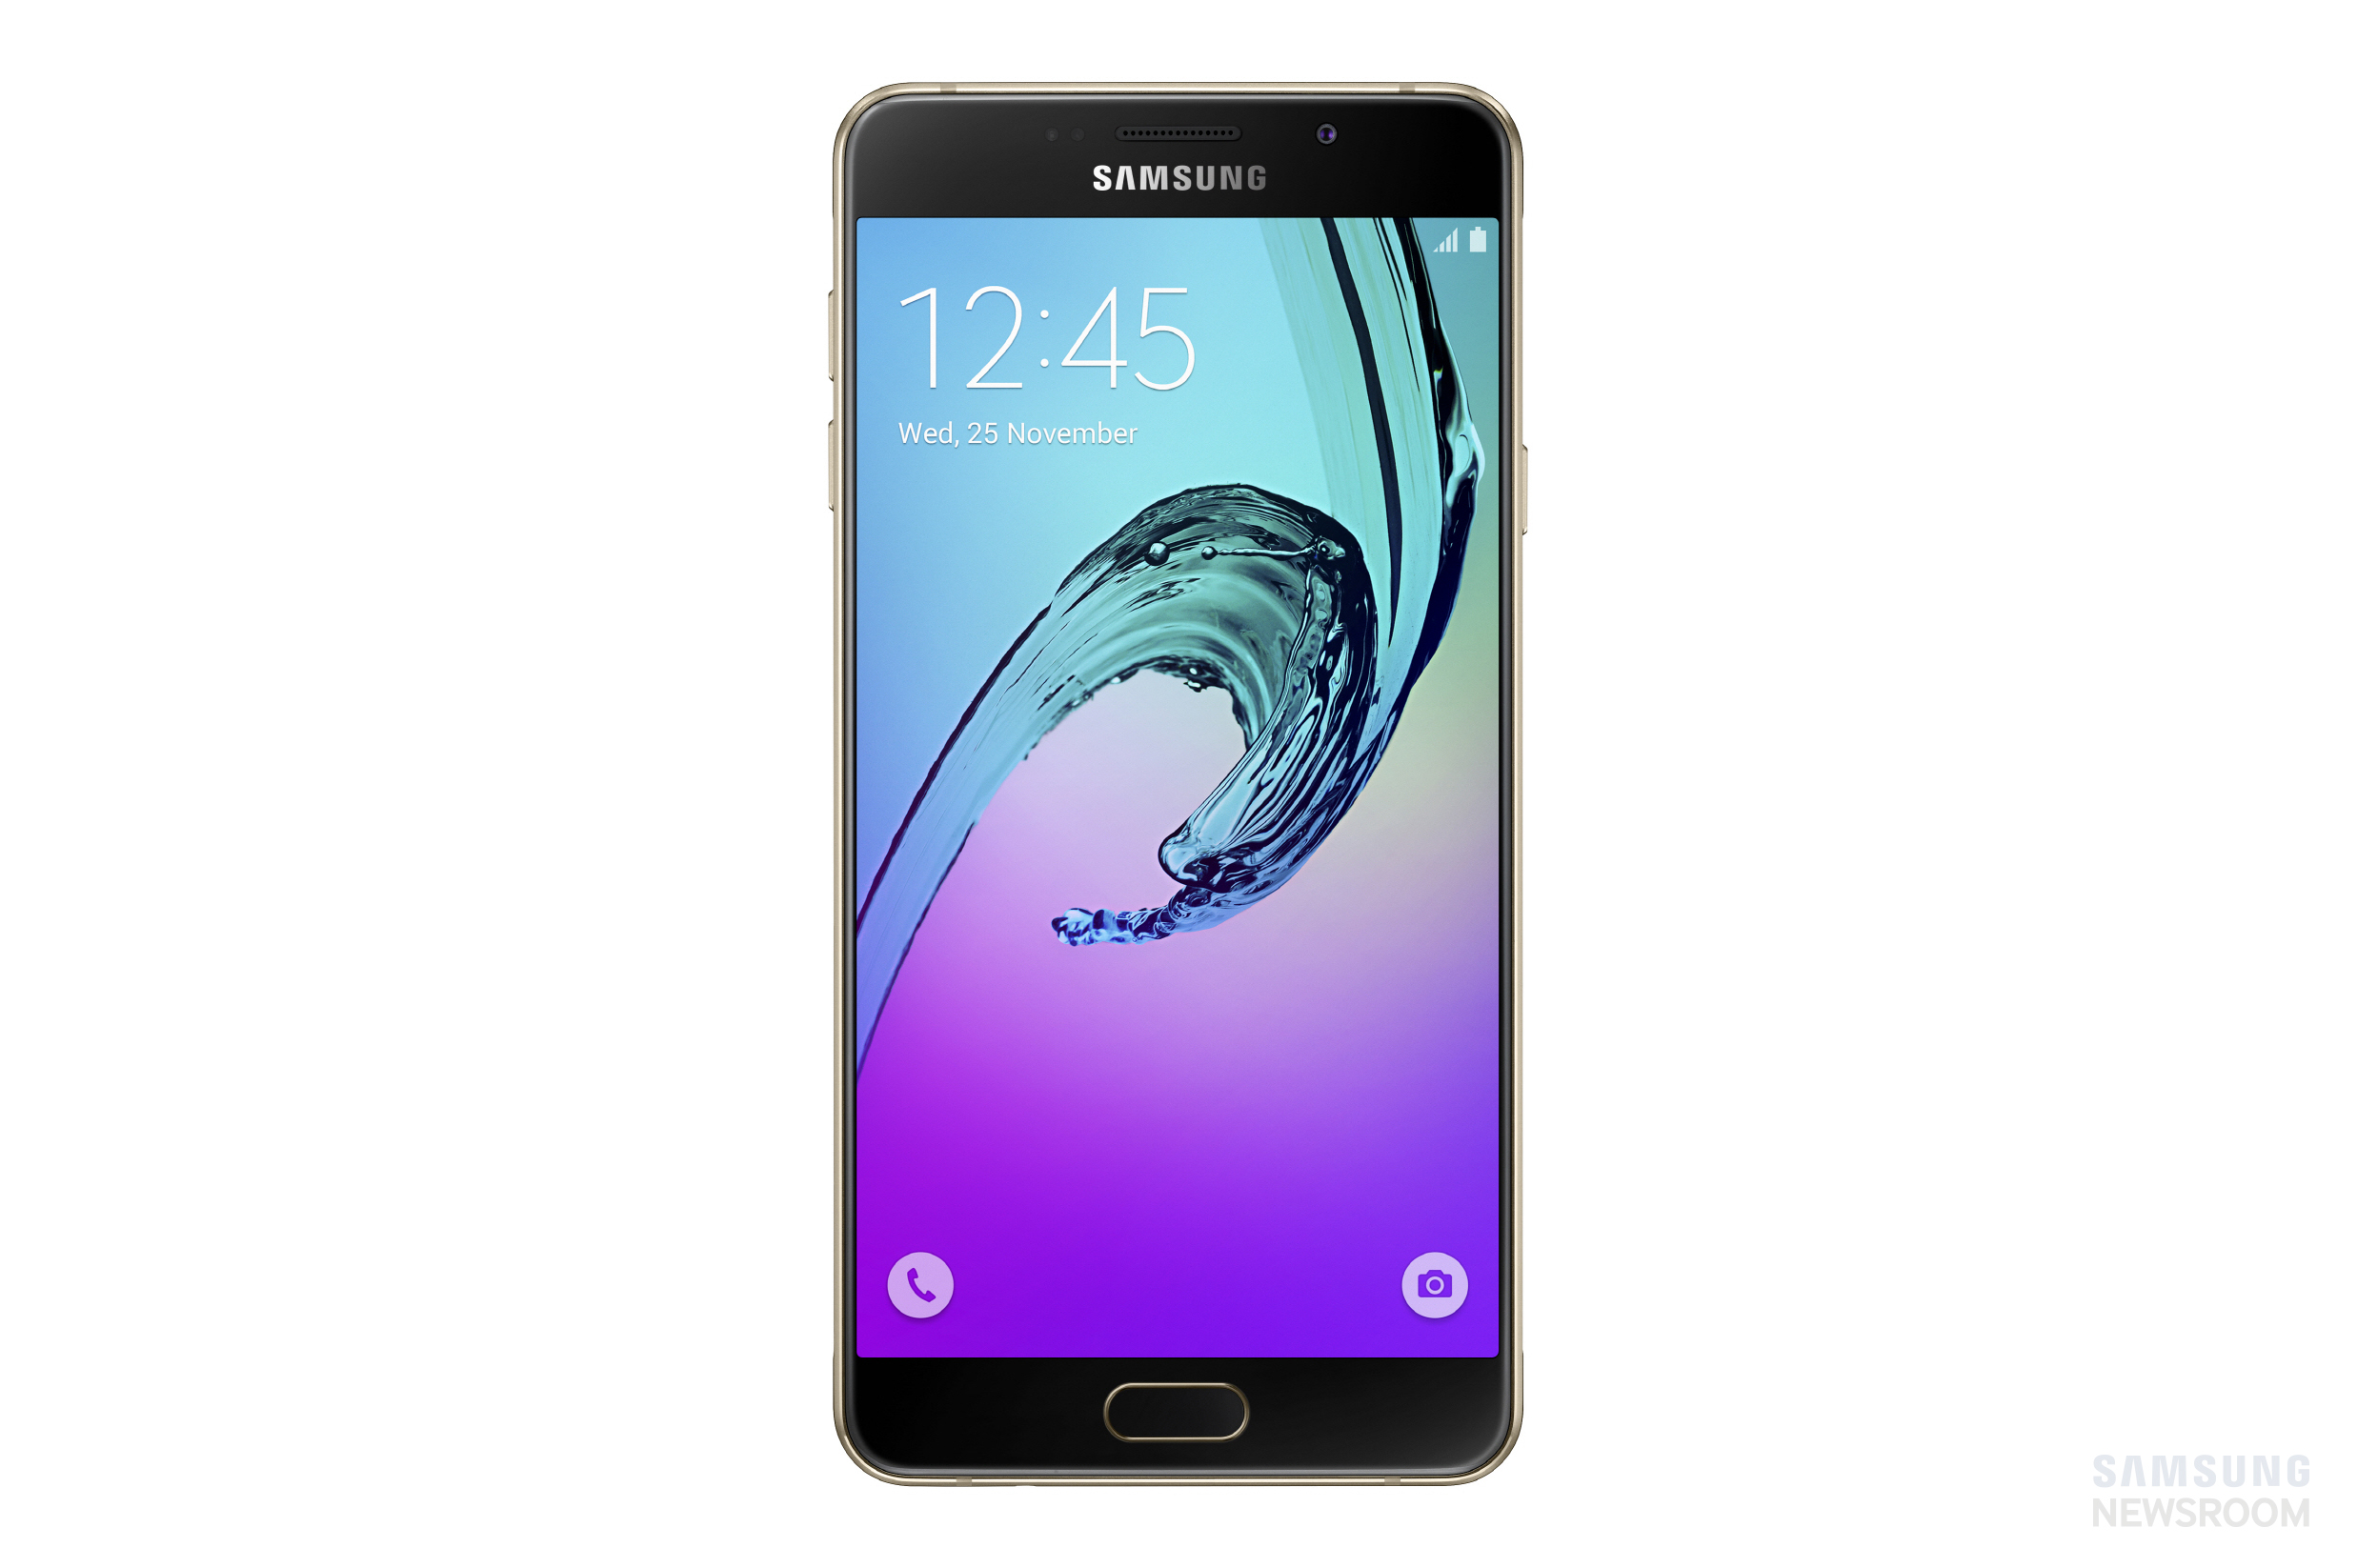 Gevangenisstraf Op maat stad Samsung Launches Galaxy A (2016) with Premium Design and Improved Features  – Samsung Global Newsroom